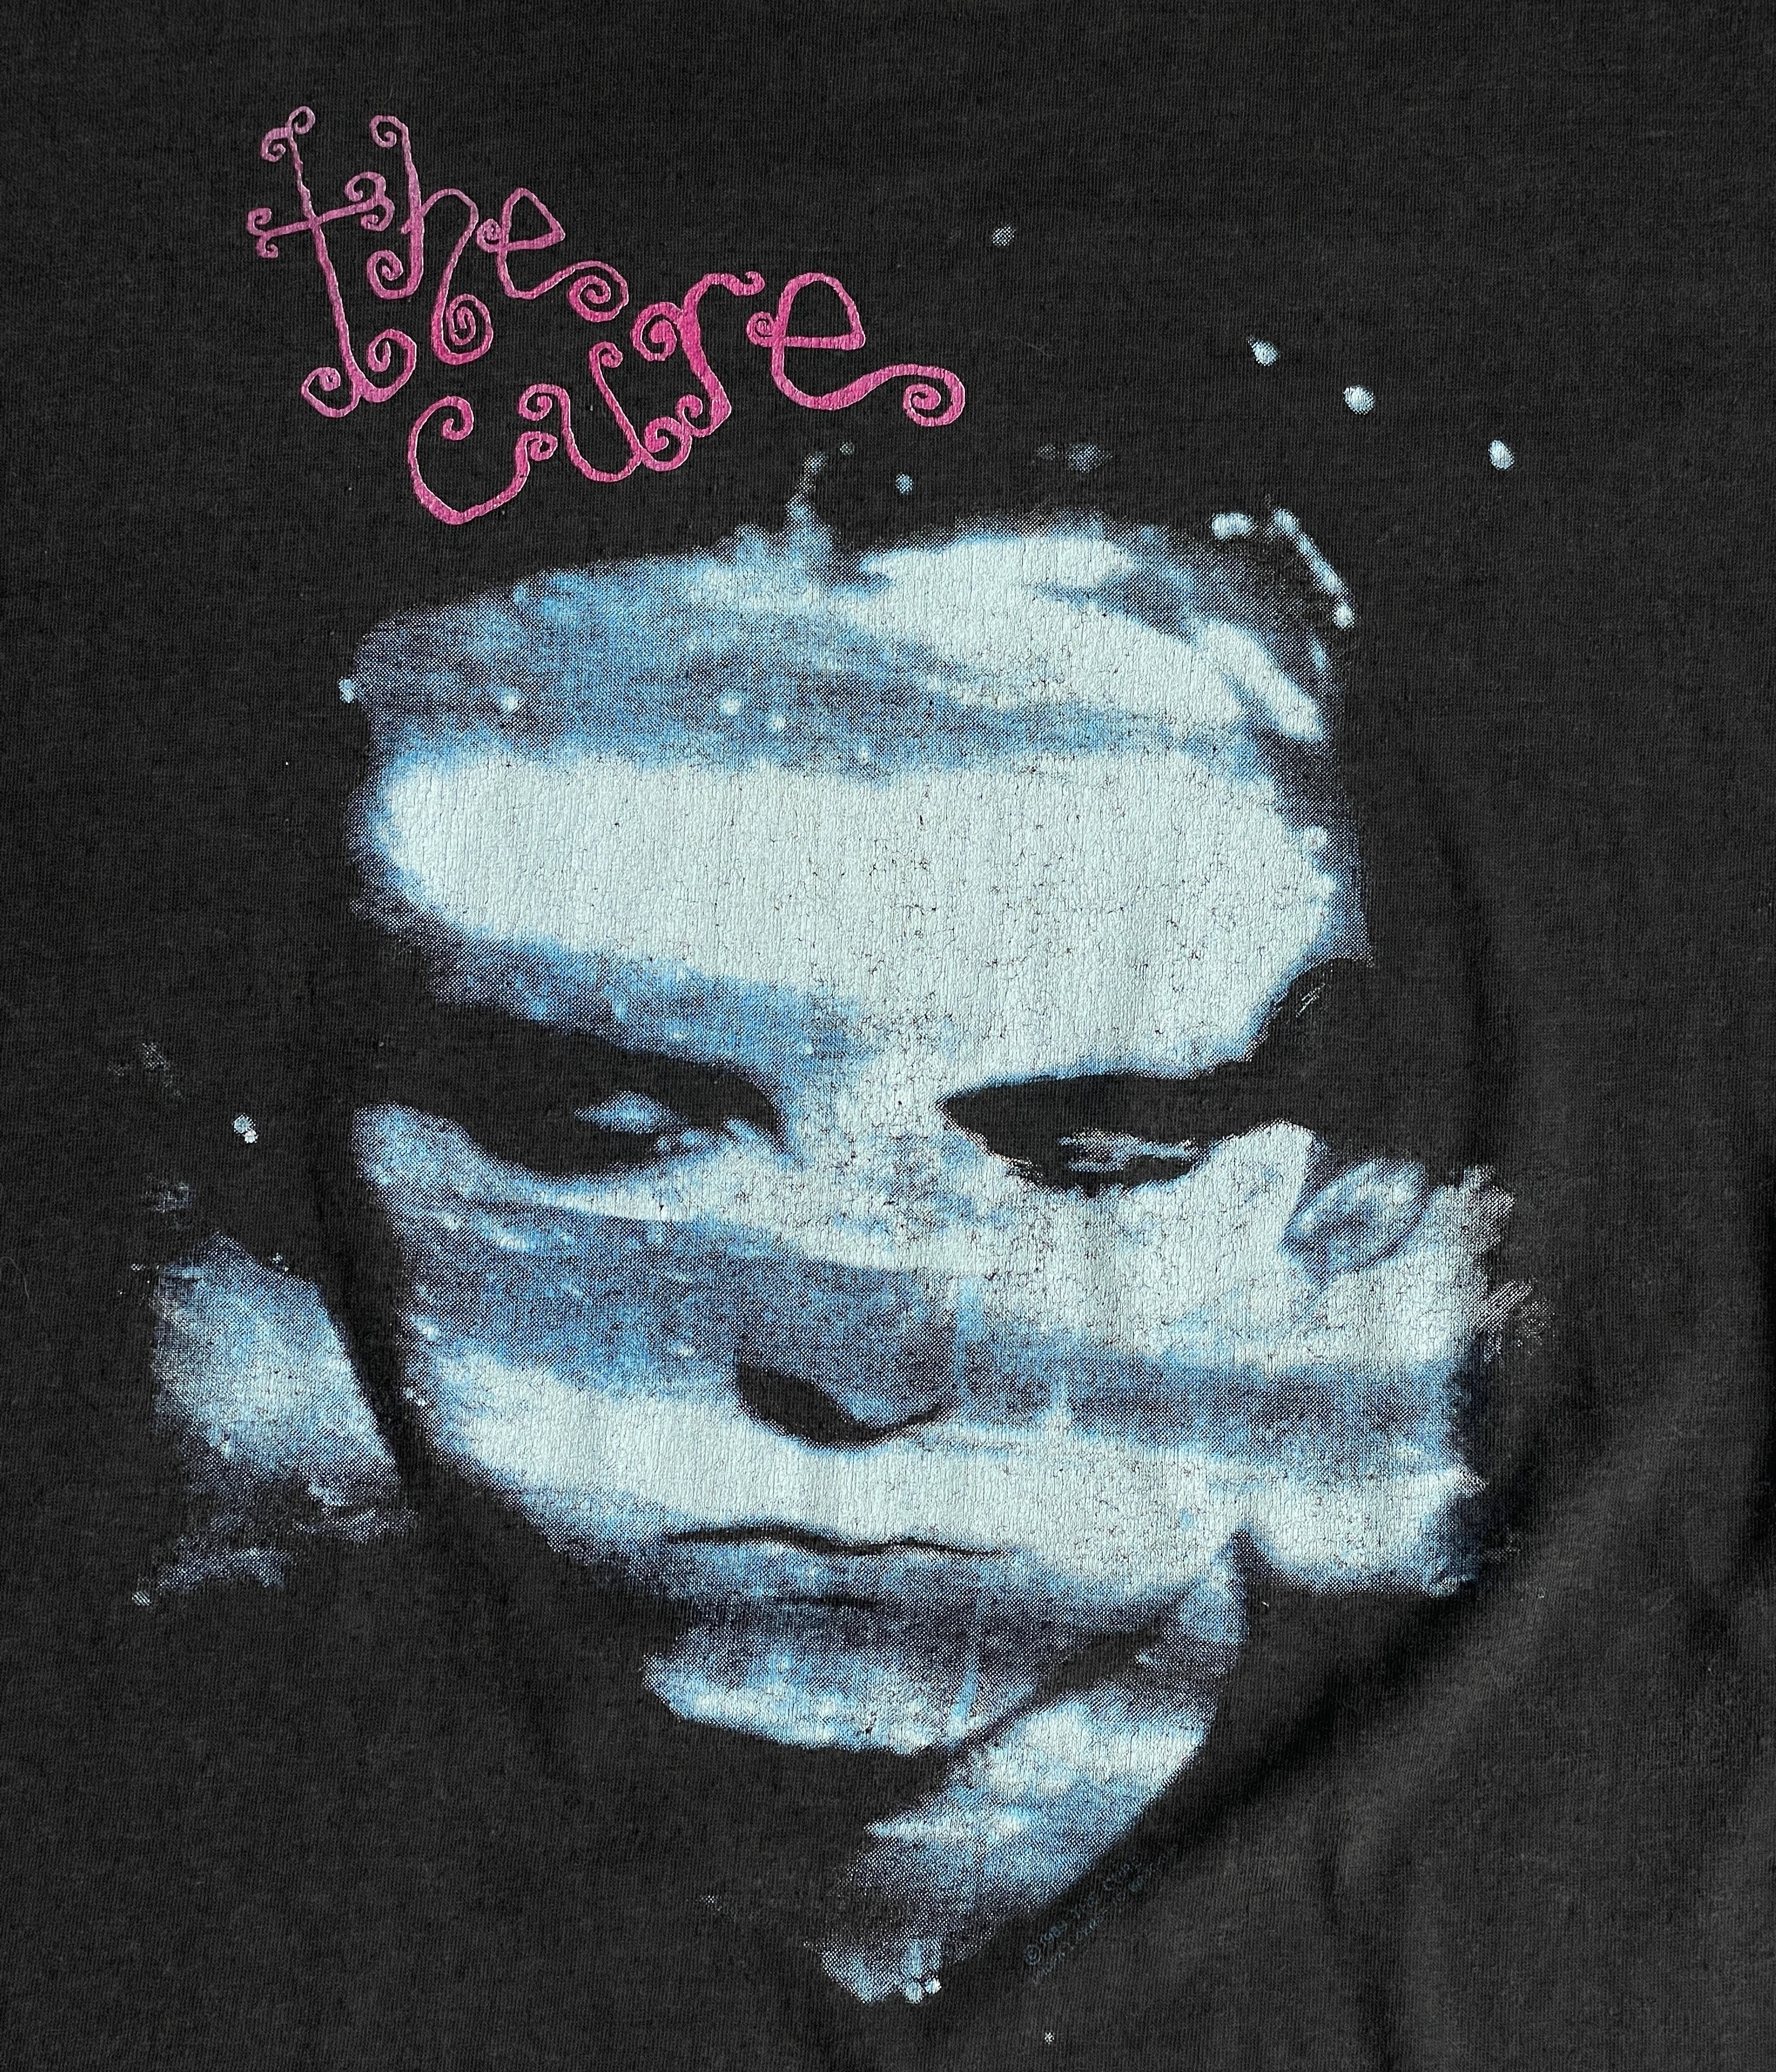 THE CURE ザ キュアー バンド Tシャツ ヴィンテージ 80s 90s